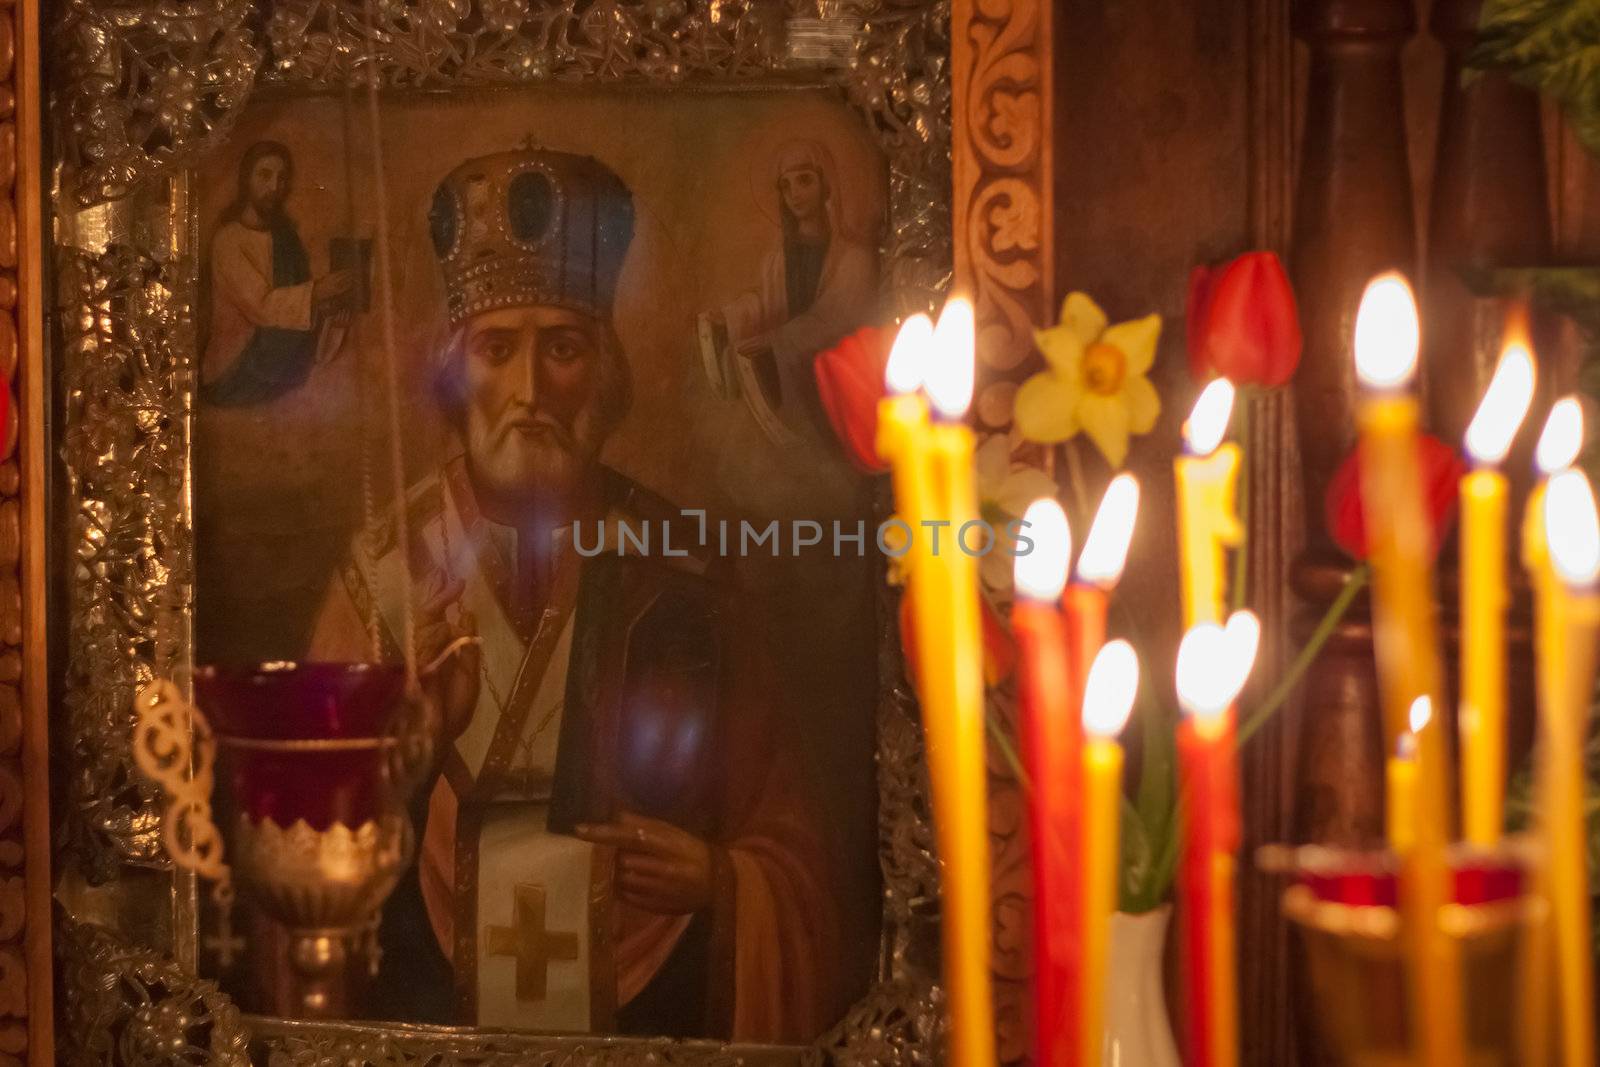 GOMEL - MAY 4: Interior Of Belarusian Orthodox Church. Candles Under The Ancient Icon Framed With The Gold On May 4, 2013 In Gomel, Belarus